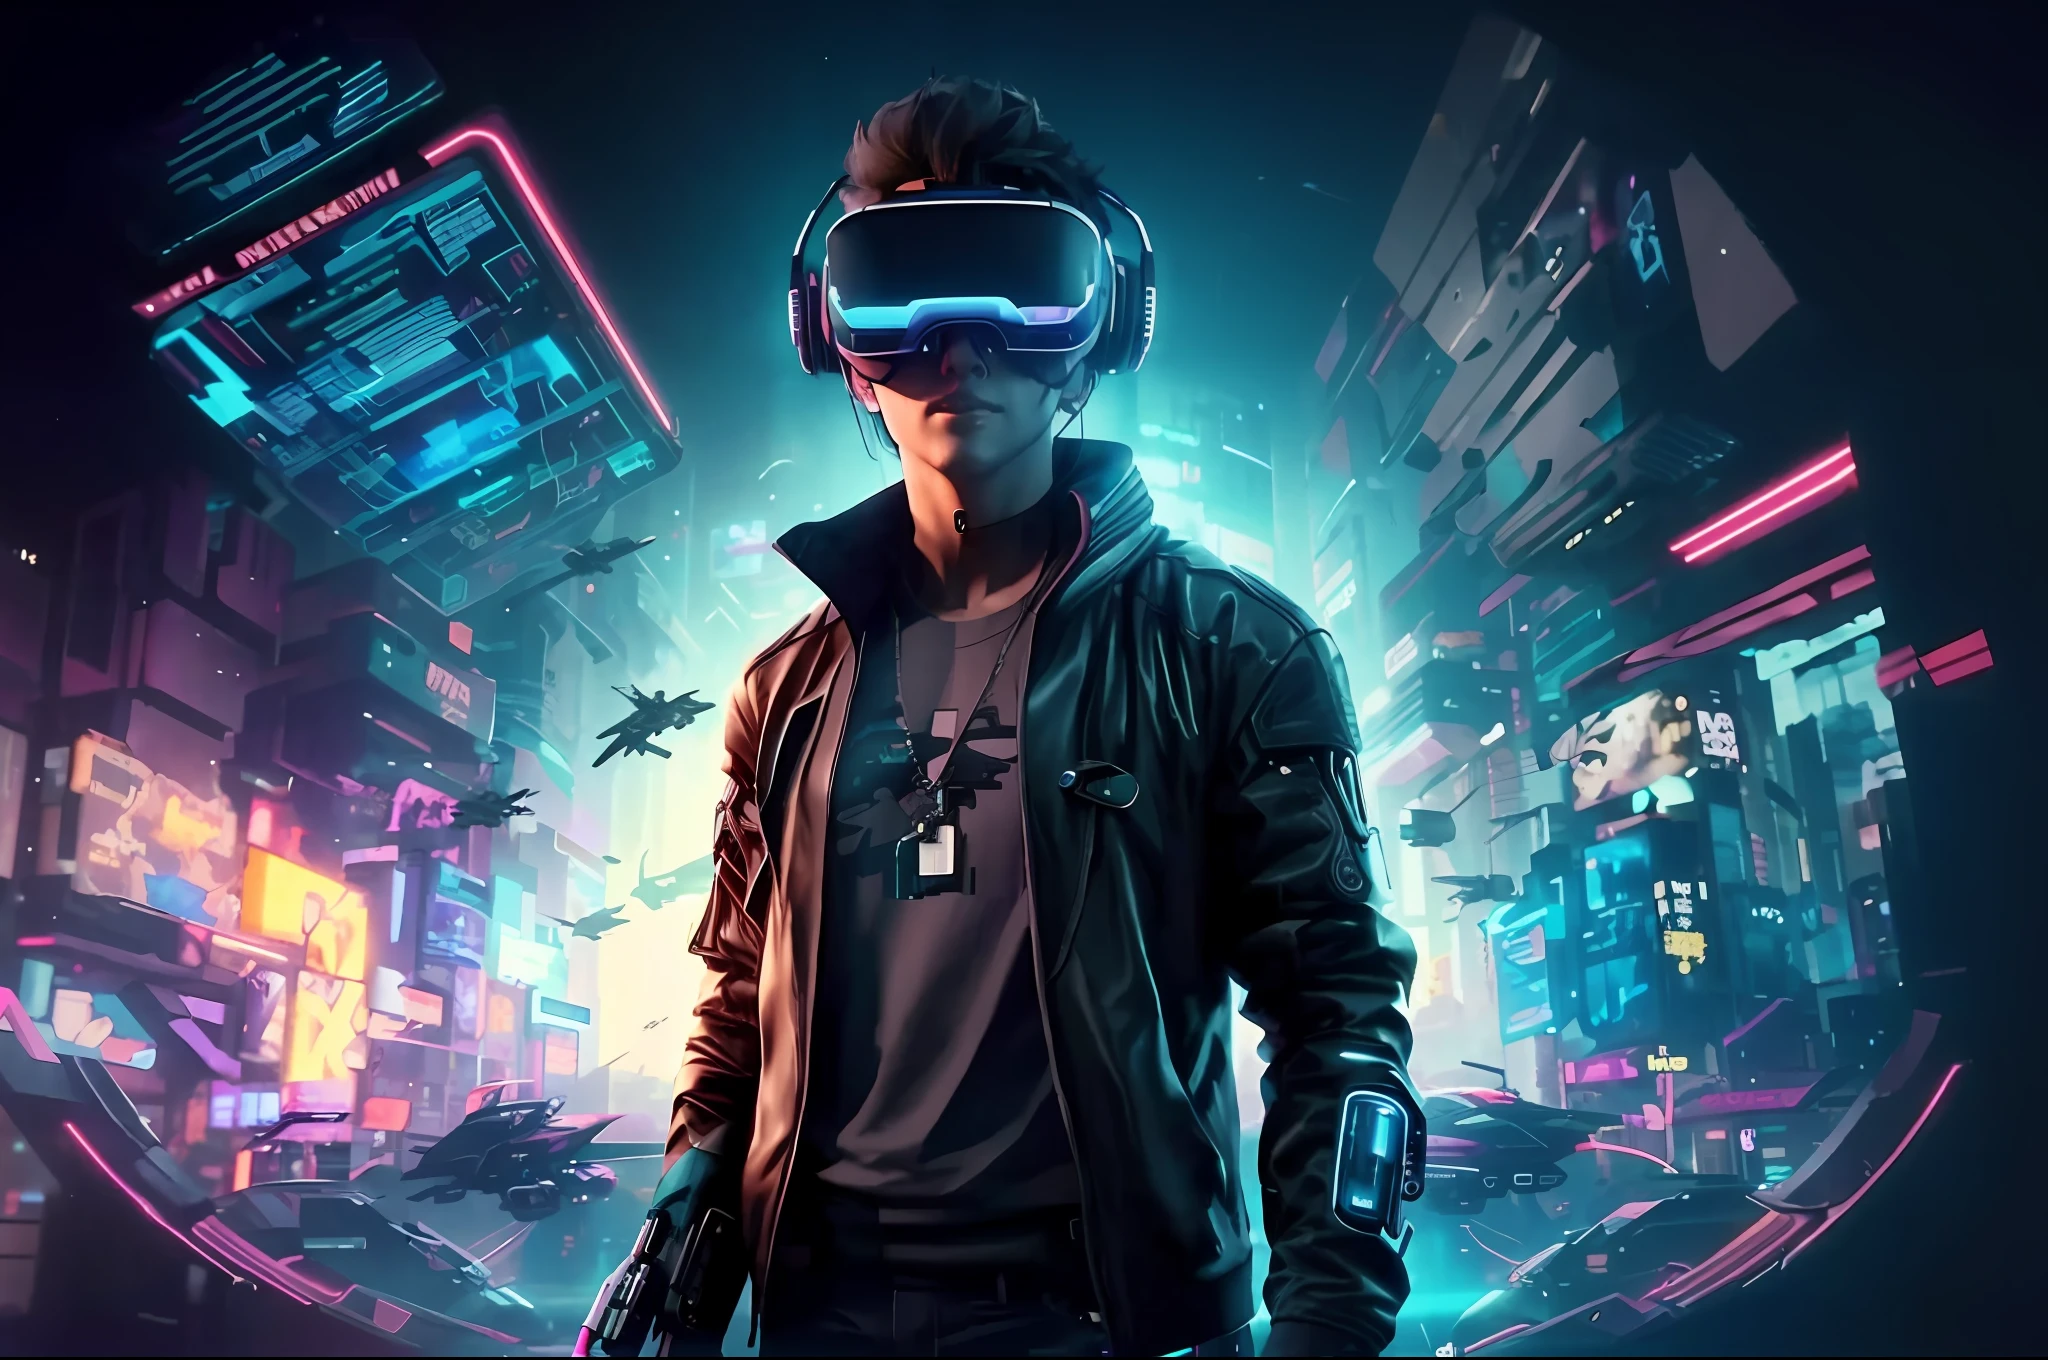 a man in a black jacket and glasses stands in front of a futuristic city, vr game, cyberpunk vibe, cyberpunk vibes, deeper into the metaverse we go, has cyberpunk style, cyberpunk theme, in cyber punk 2077, cyberpunk futuristic, cyberpunk future, synthwave, wearing cyberpunk streetwear, futuristic cyberpunk, cyberpunk tech, retro cyberpunk, synthwave style